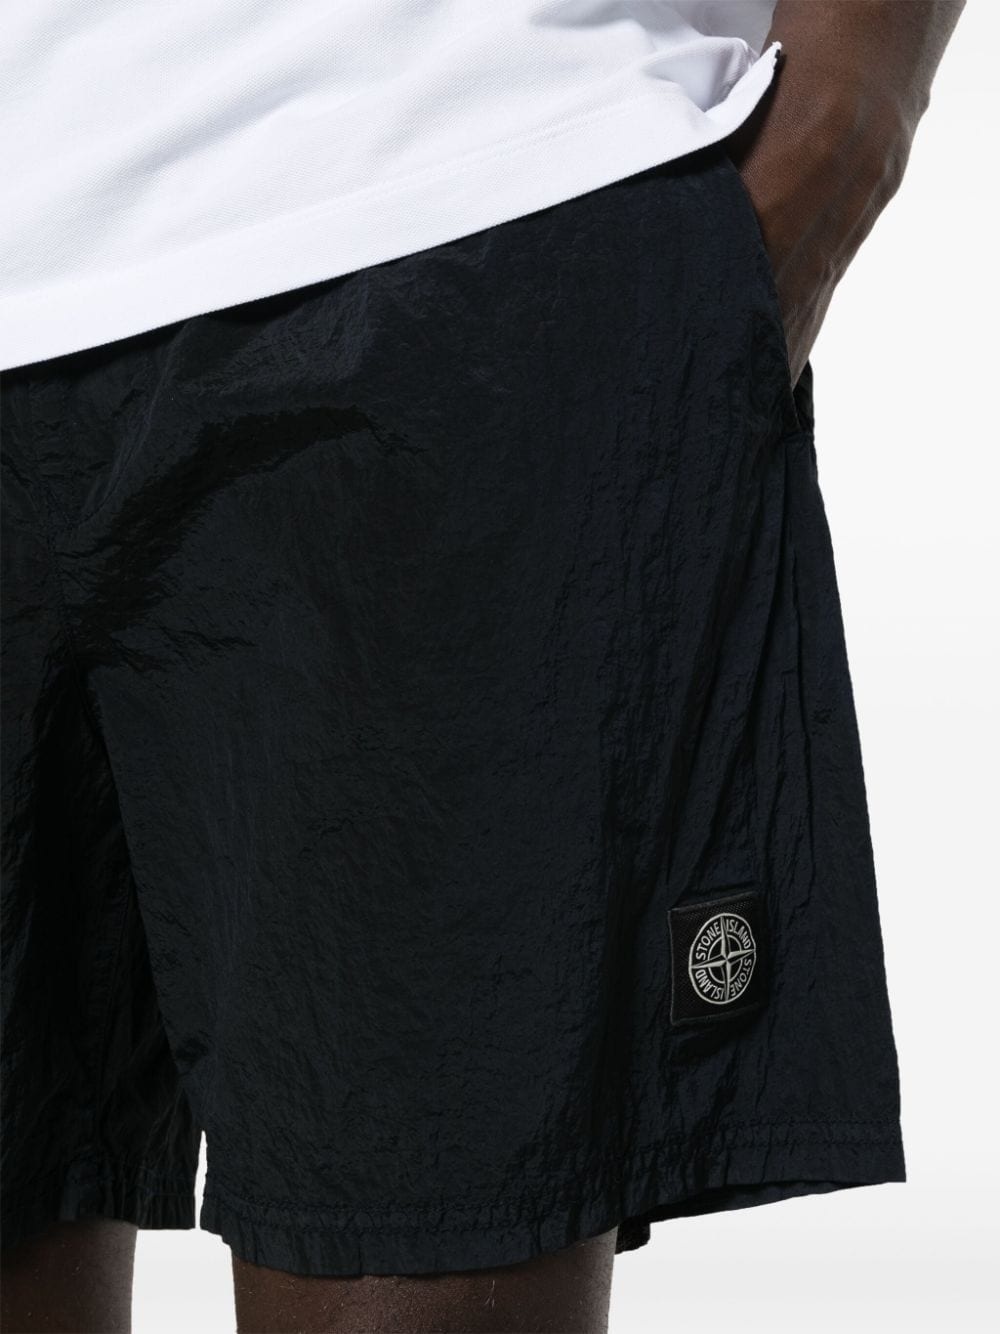 Compass crinkled shorts - 5